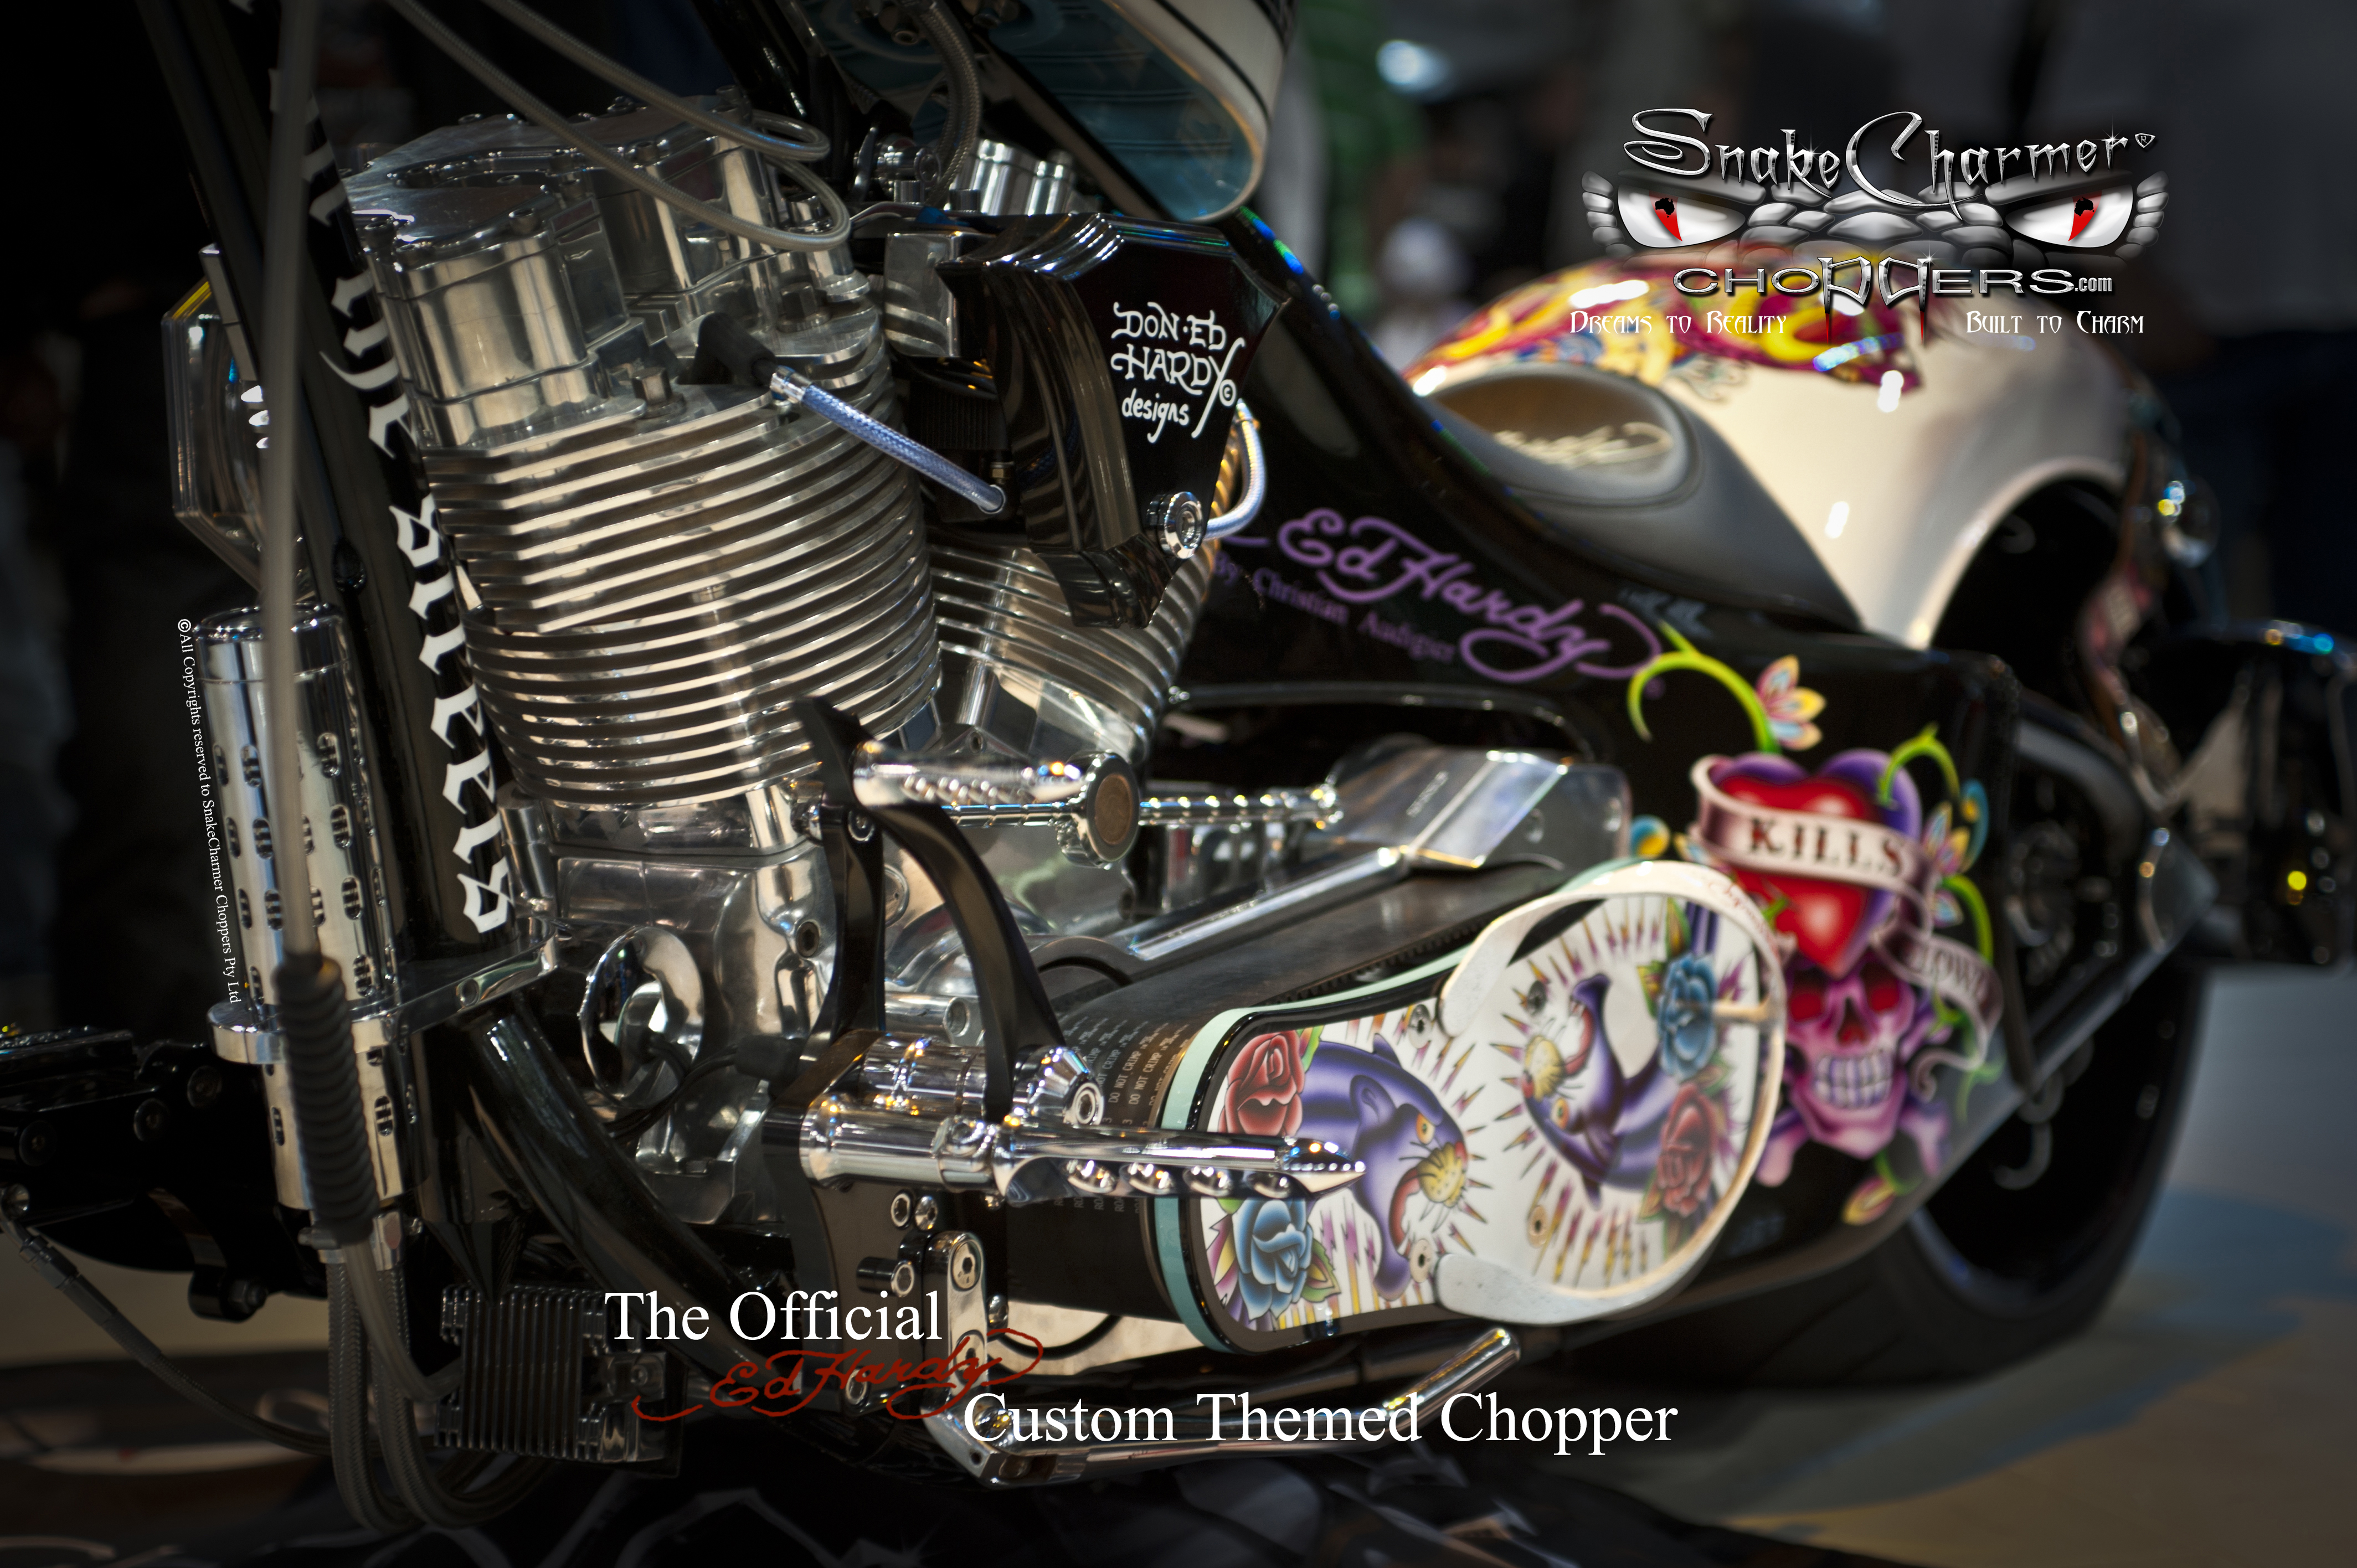 Worlds First Official Ed Hardy custom theme Chopper. Buit and designed by SnakeCharmer Choppers